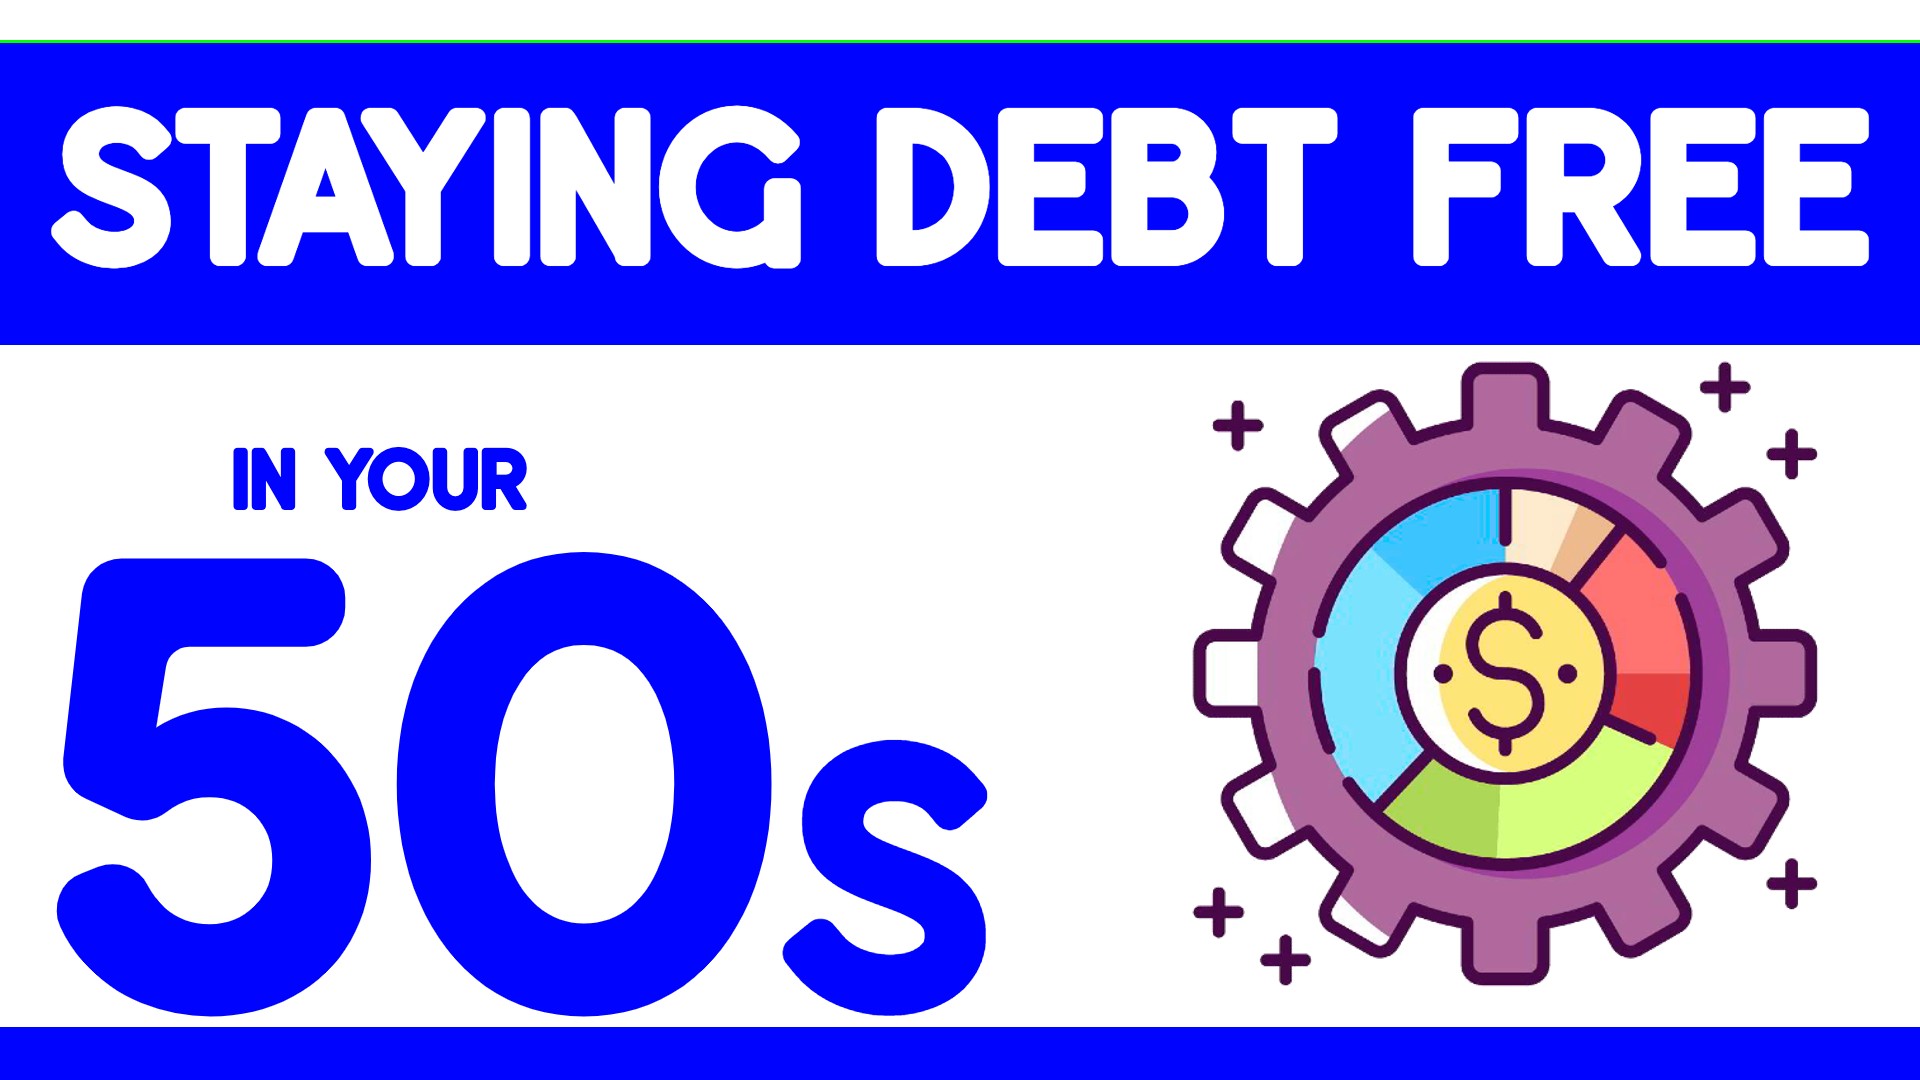 Staying Debt-Free in Your 50s